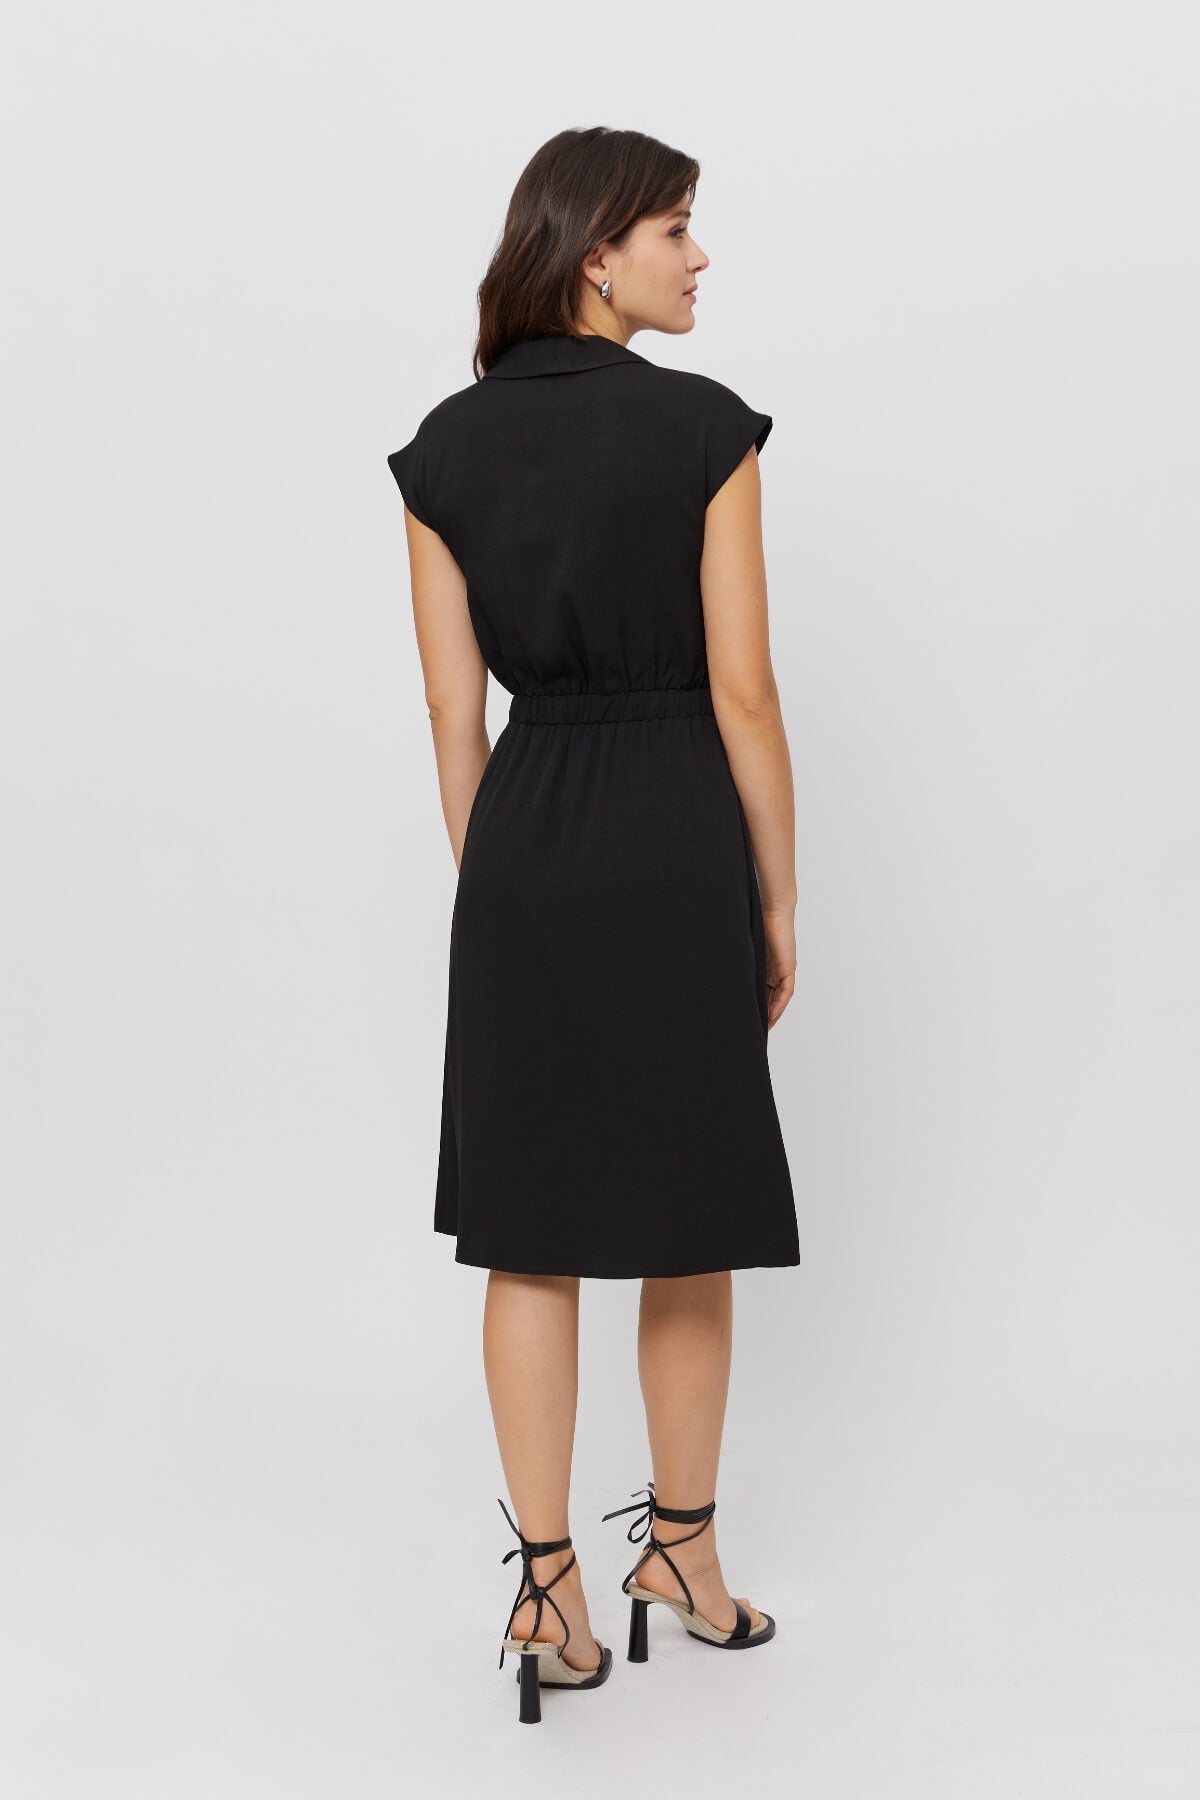 Lilit | Formal Midi Dress with Wrap Optic in Black